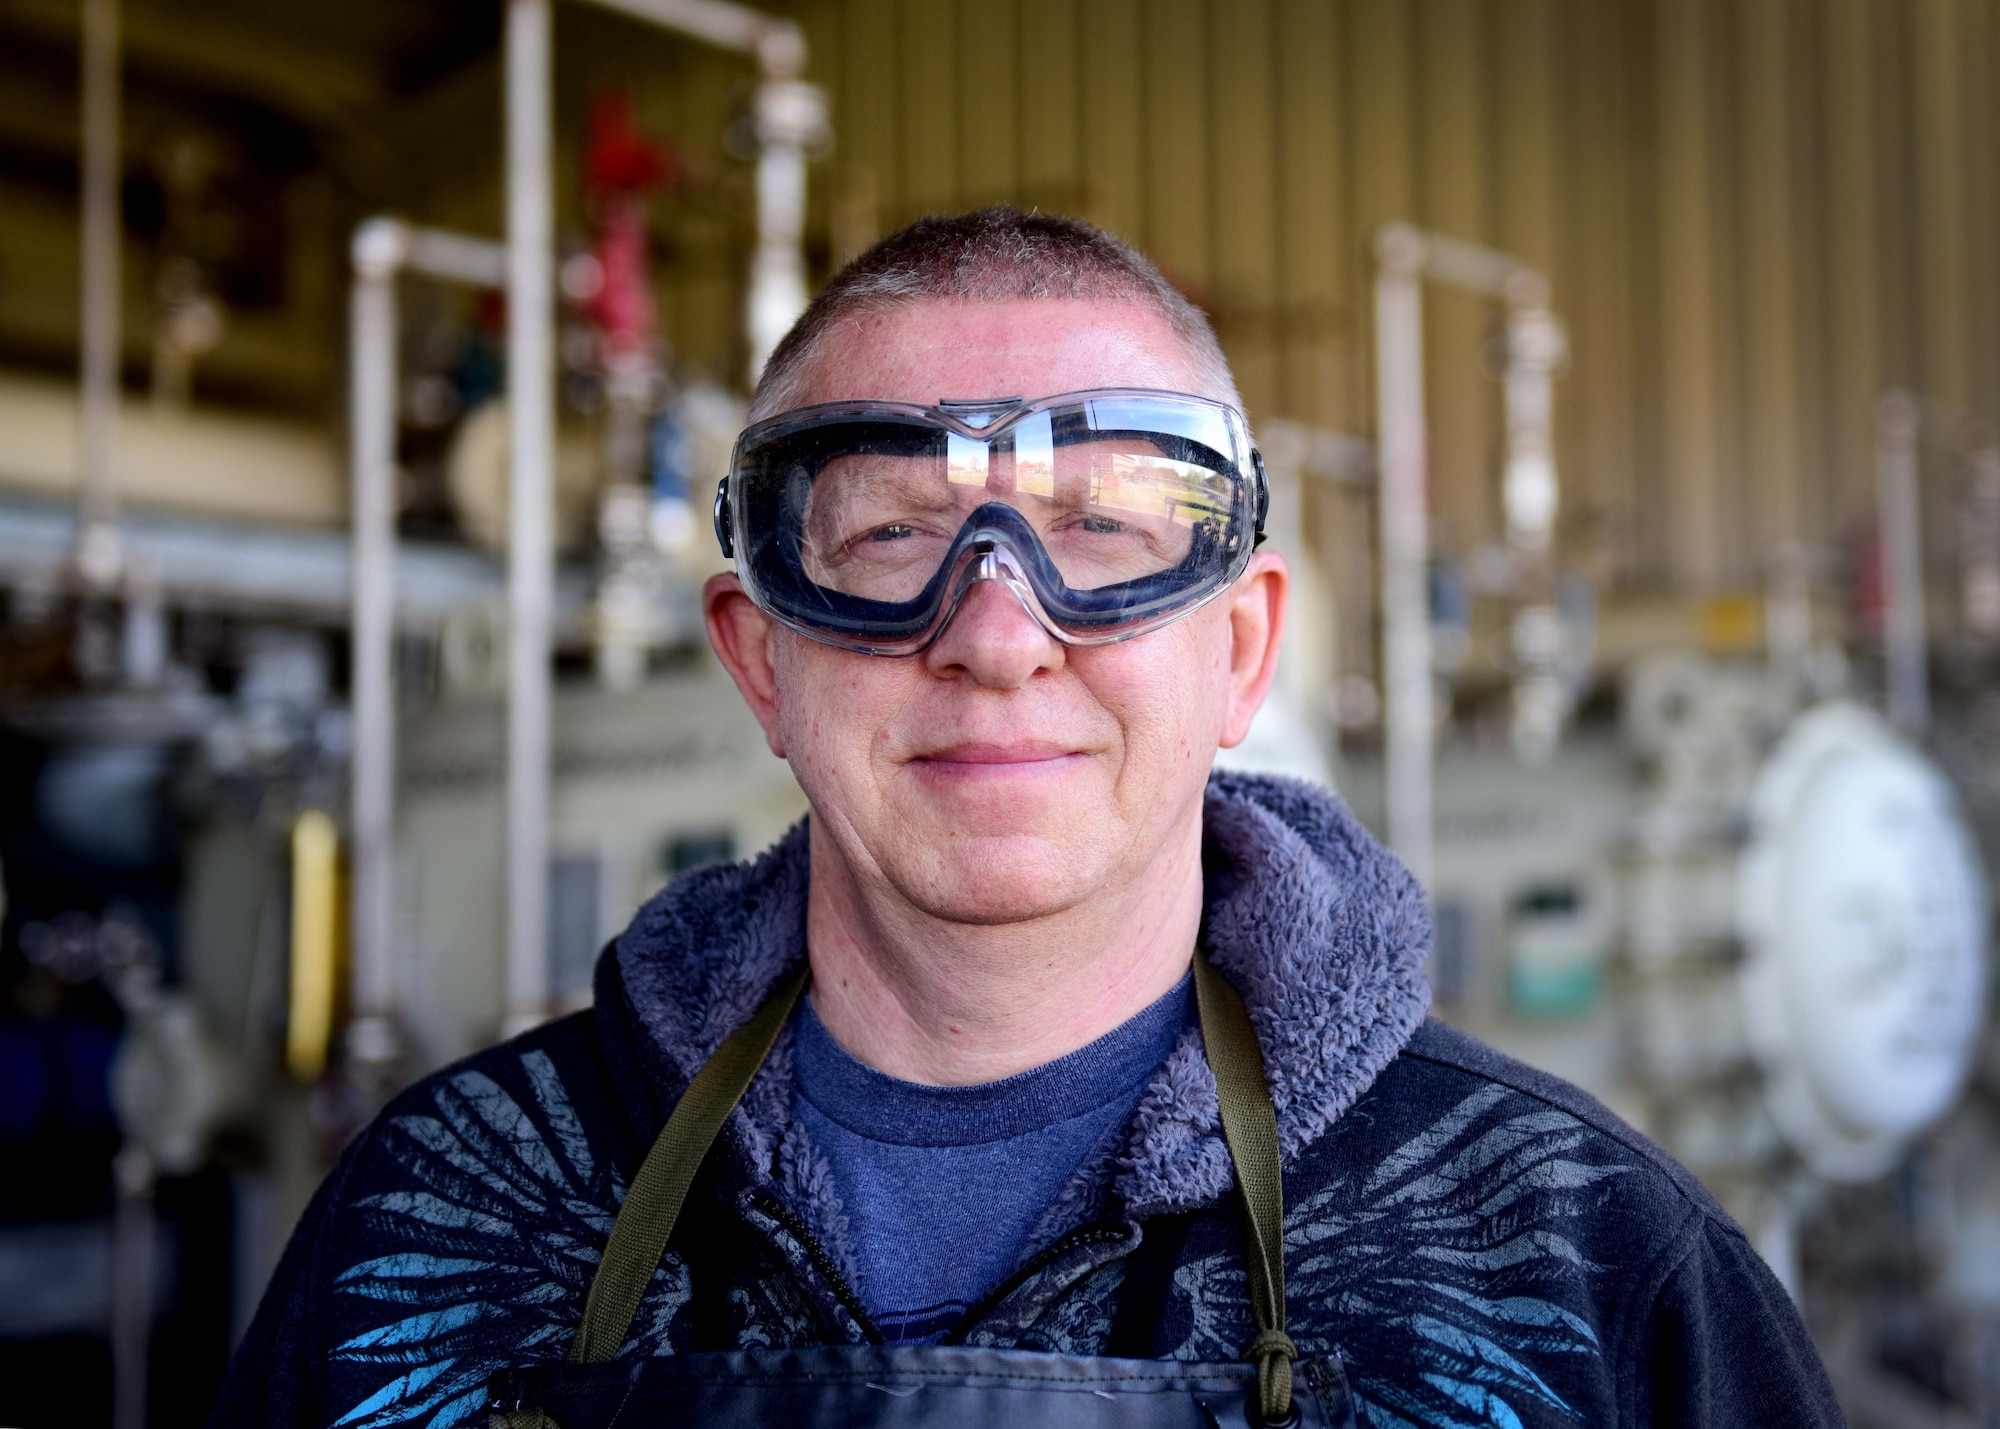 Darryl Hodge, 733rd Logistics Readiness Squadron fuels facilities fuels distribution systems operator, poses for a photo at Joint Base Langley-Eustis, Va., April 10, 2017. Fuels facilities Airmen wear an apron, gloves and googles to protect them from spills that may occur during the fuels sampling process. (U.S. Air Force photo/Staff Sgt. Areca T. Bell)